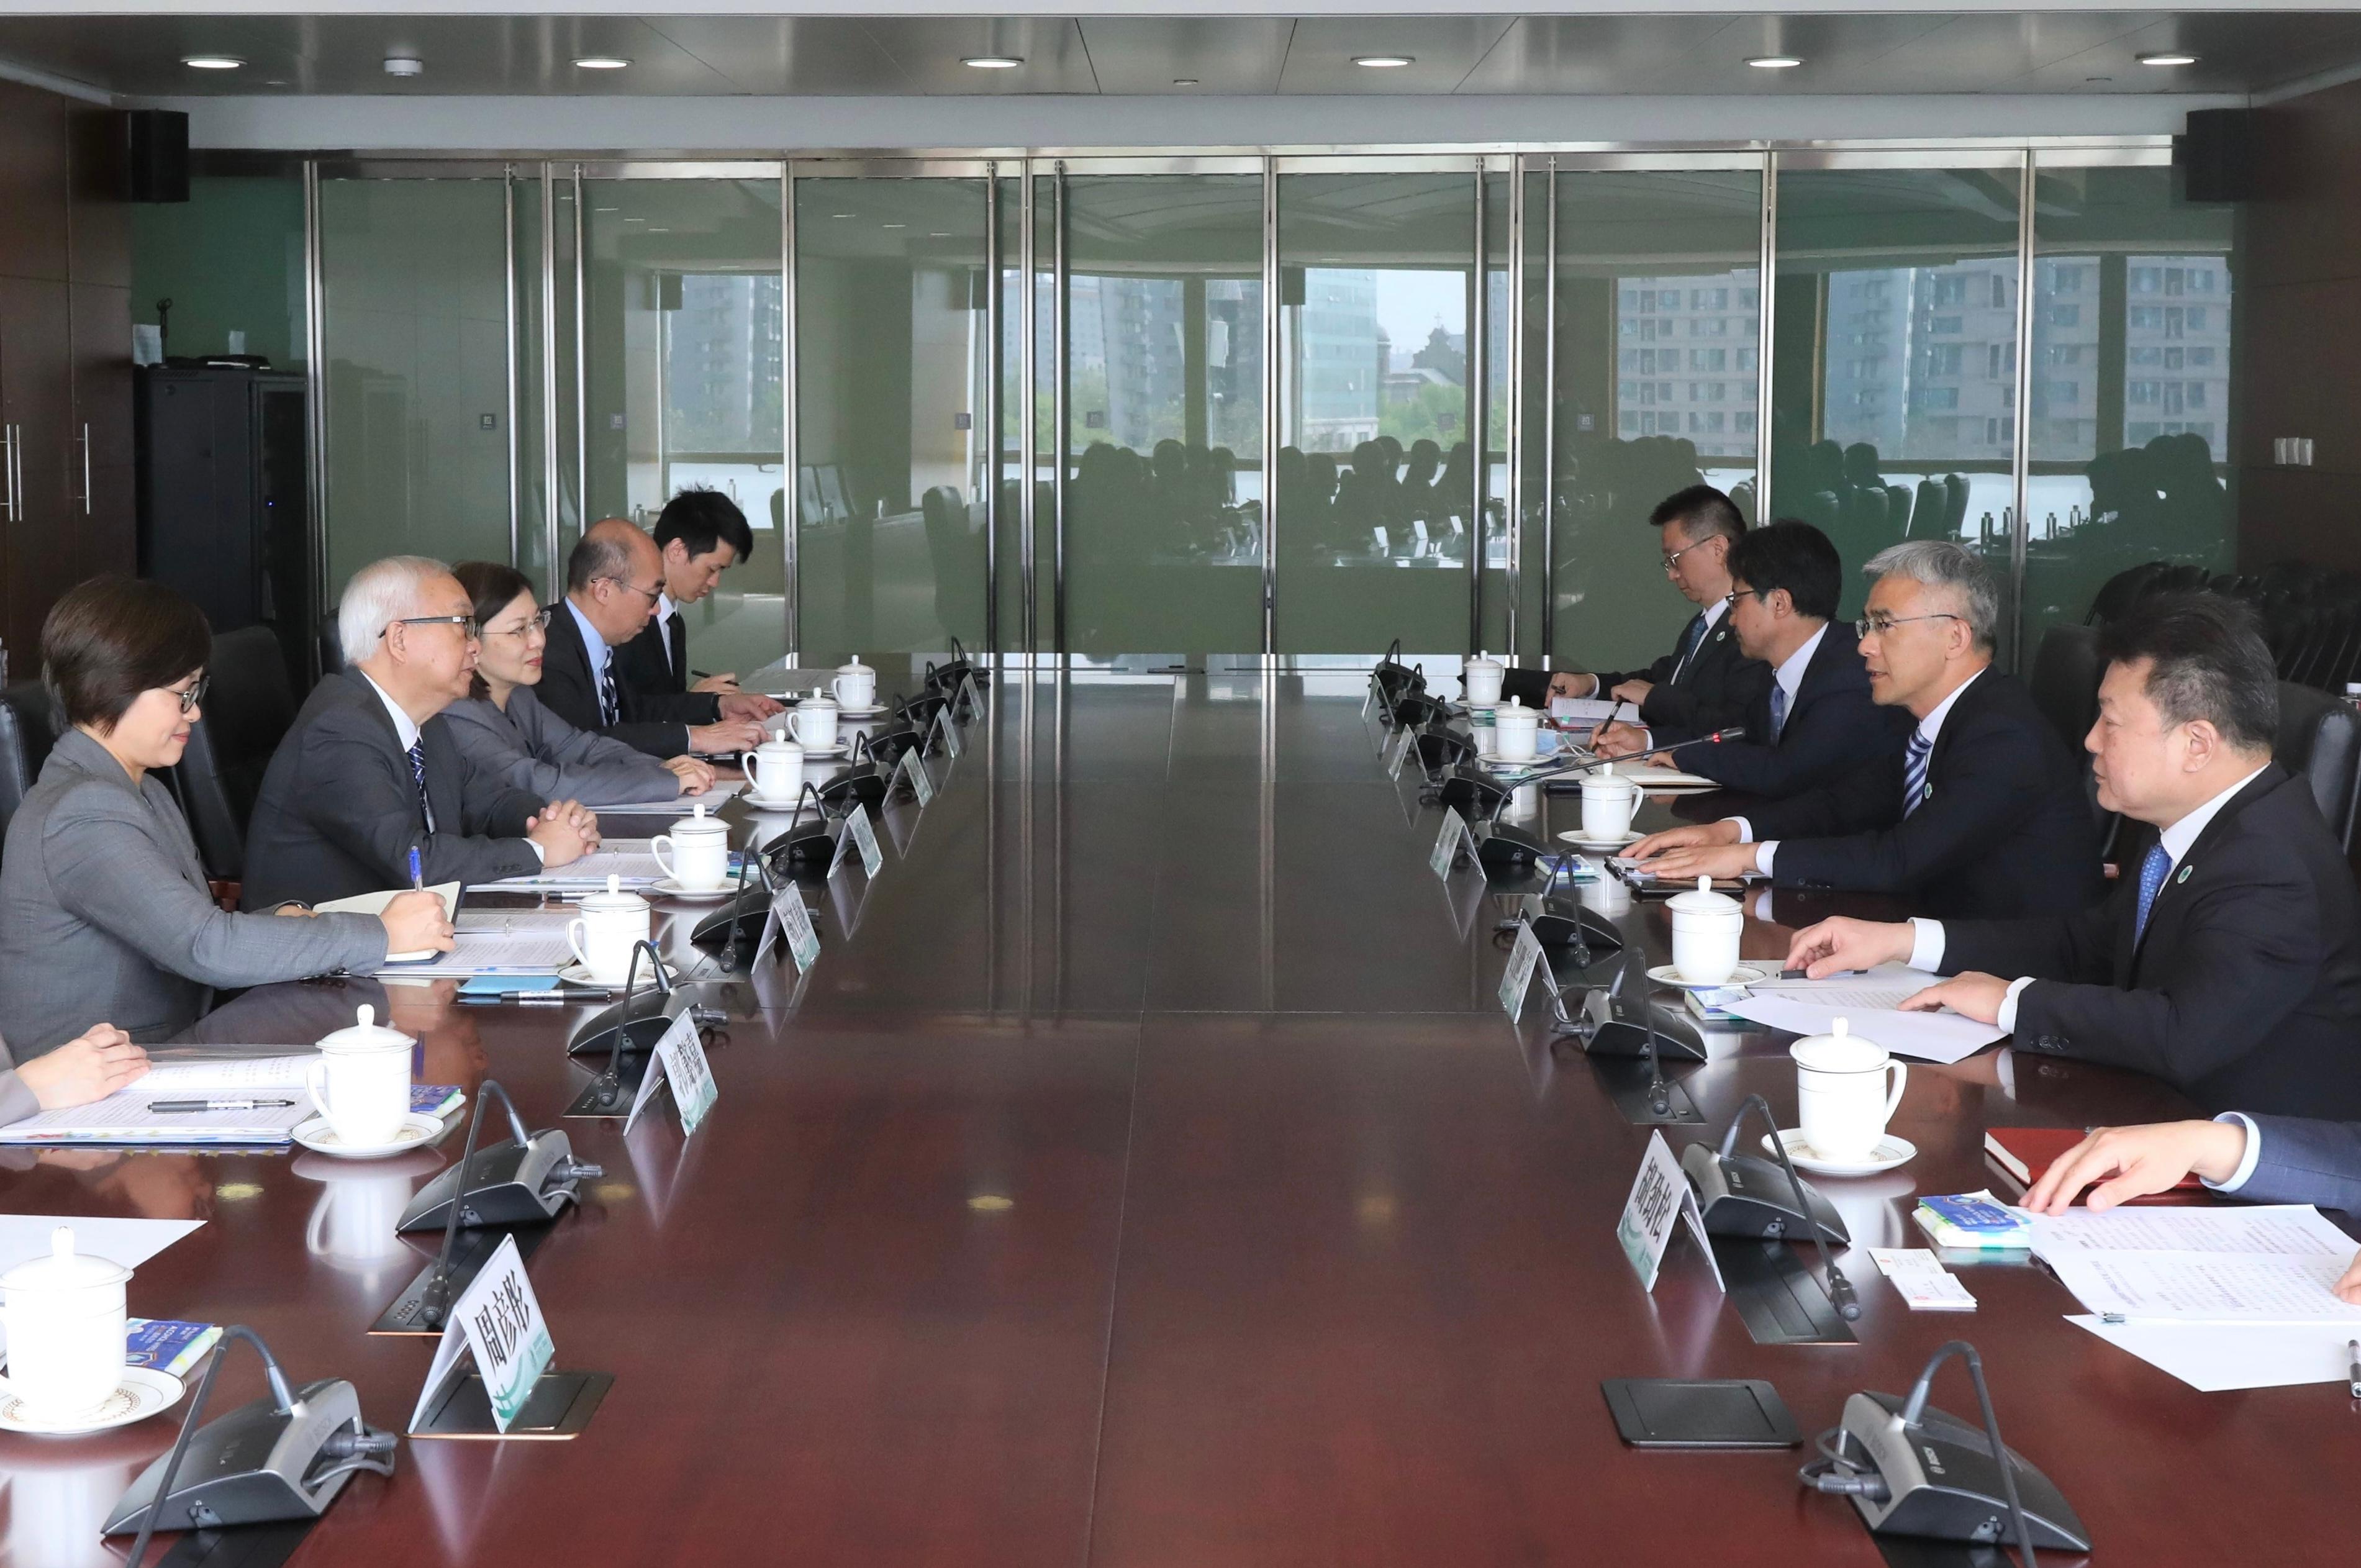 The Secretary for Environment and Ecology, Mr Tse Chin-wan (second left), today (April 17) visits the State Grid Corporation of China and meets with its Executive Vice President Mr Jin Wei (second right).